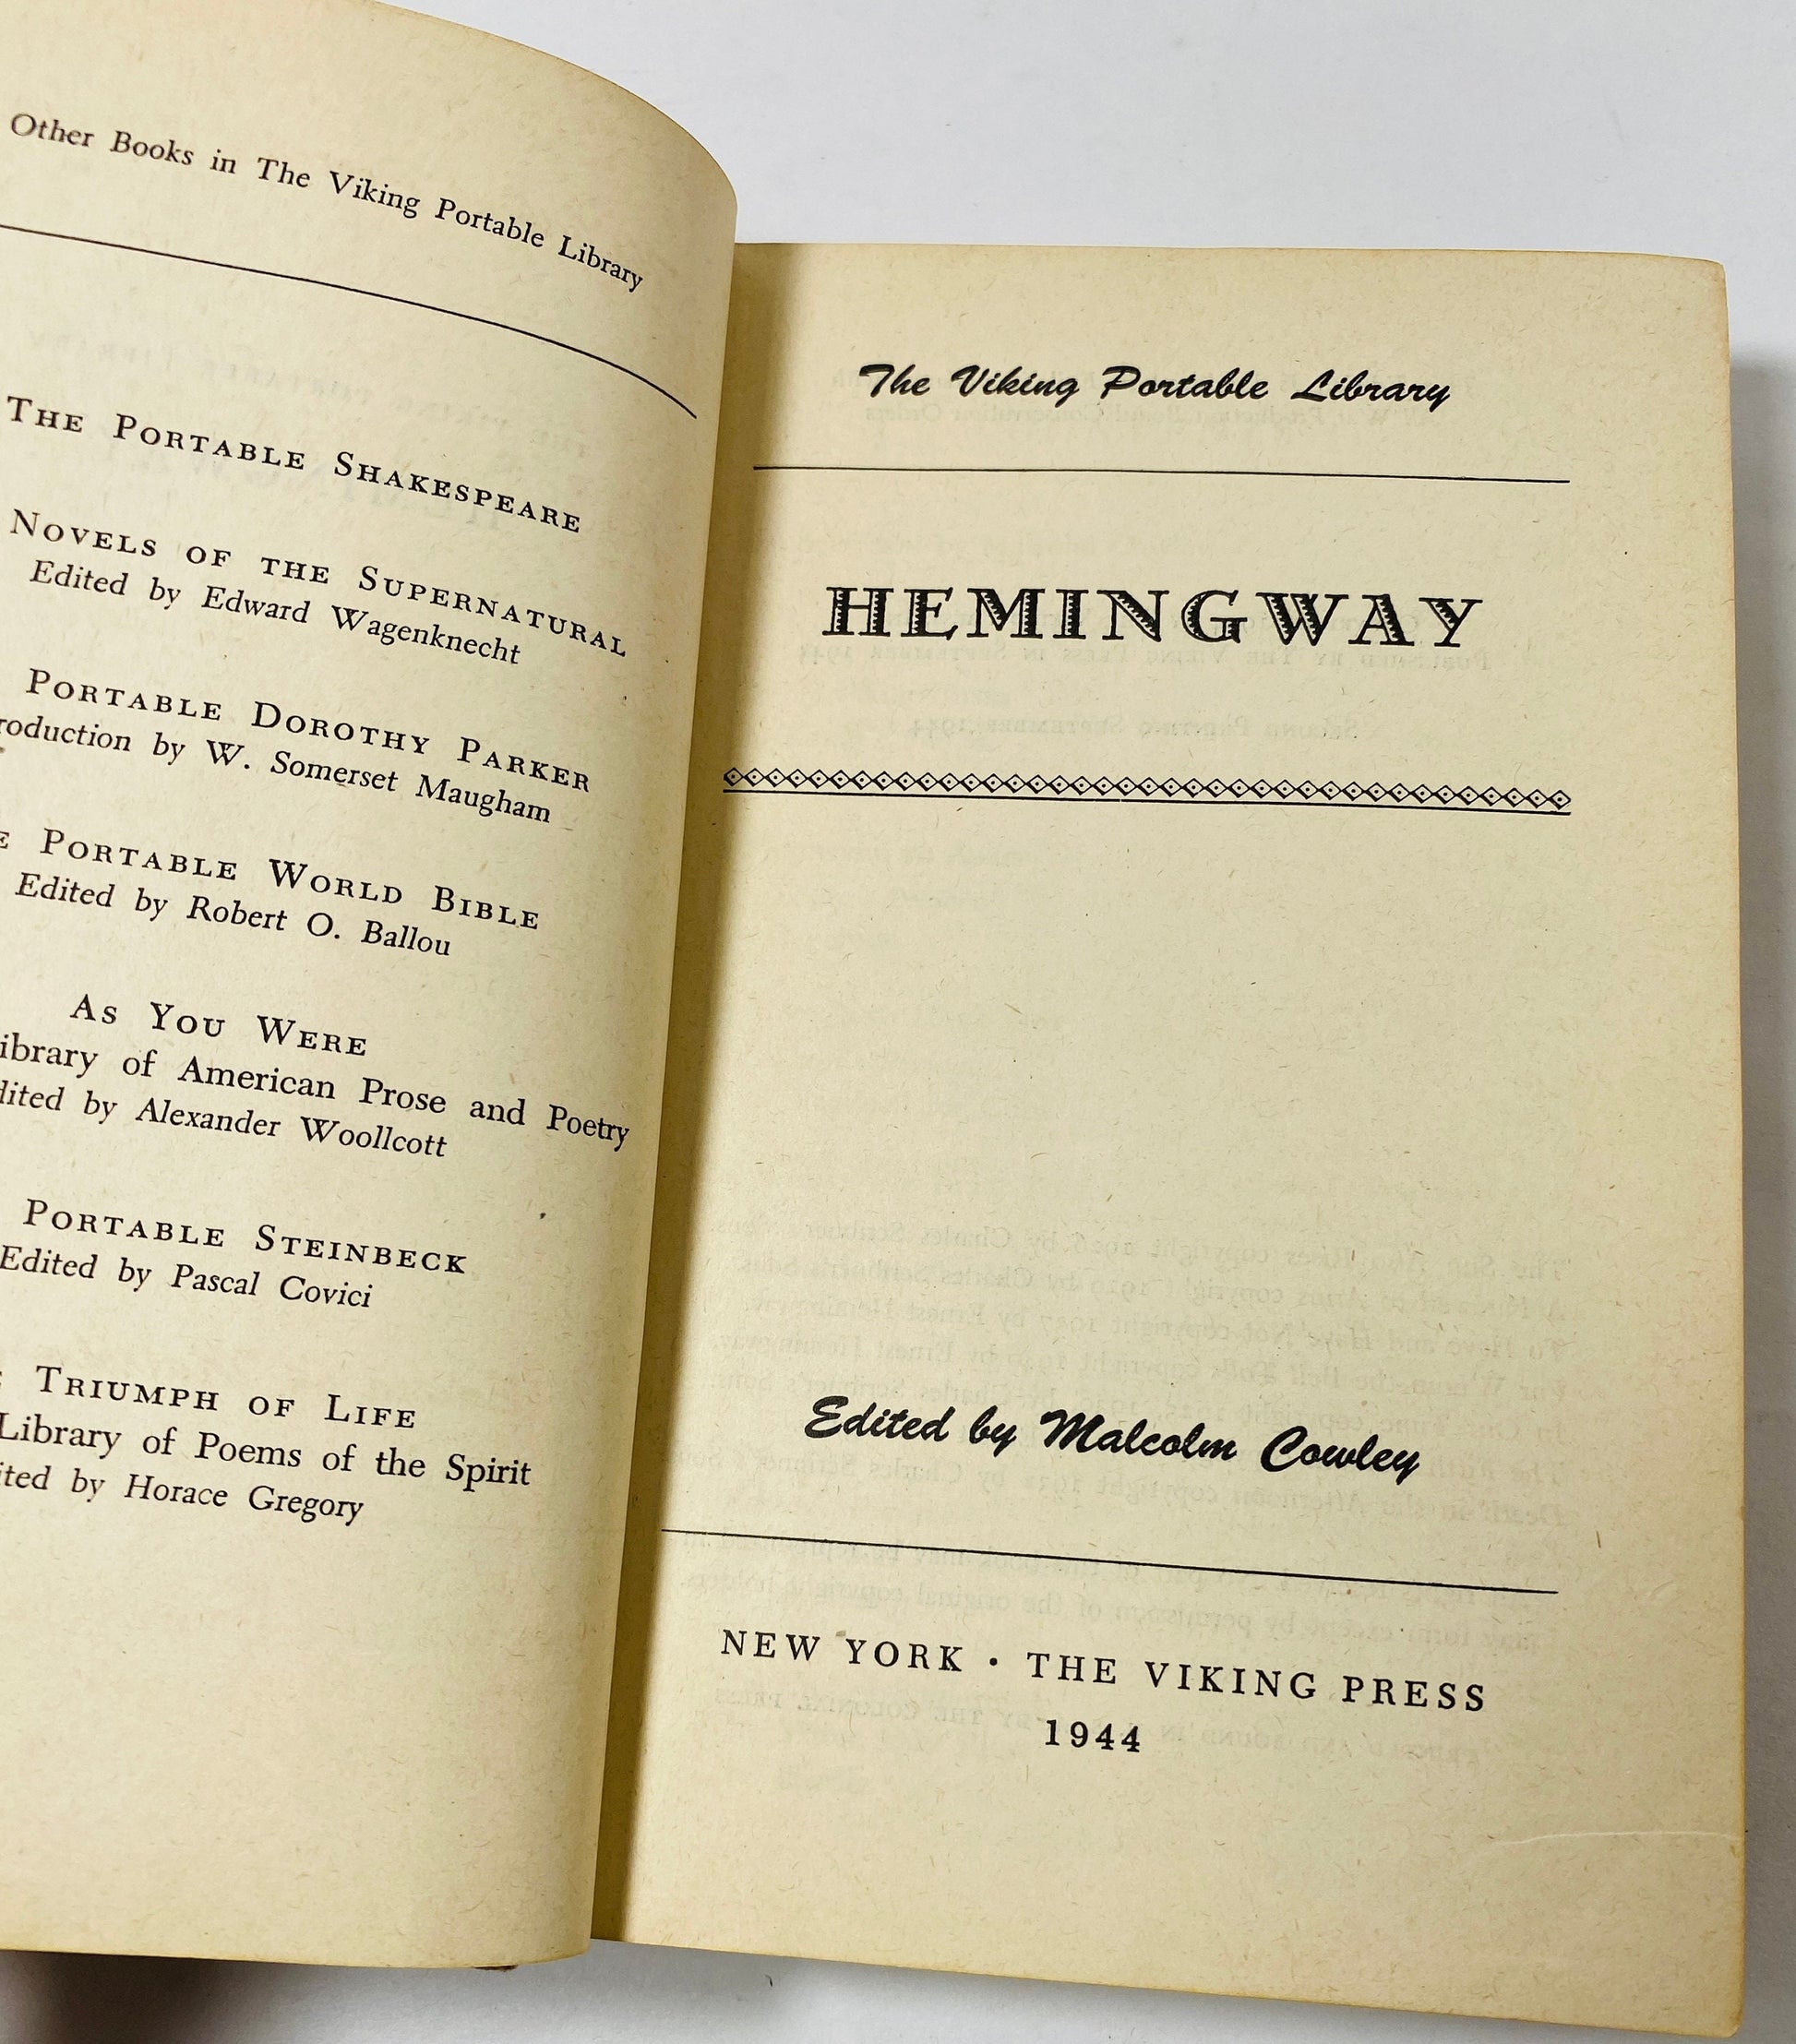 Vintage Ernest Hemingway Viking Portable Library book circa 1944 Pulitzer Prize Presented by New York Freemasons Grand Lodge to Armed Forces